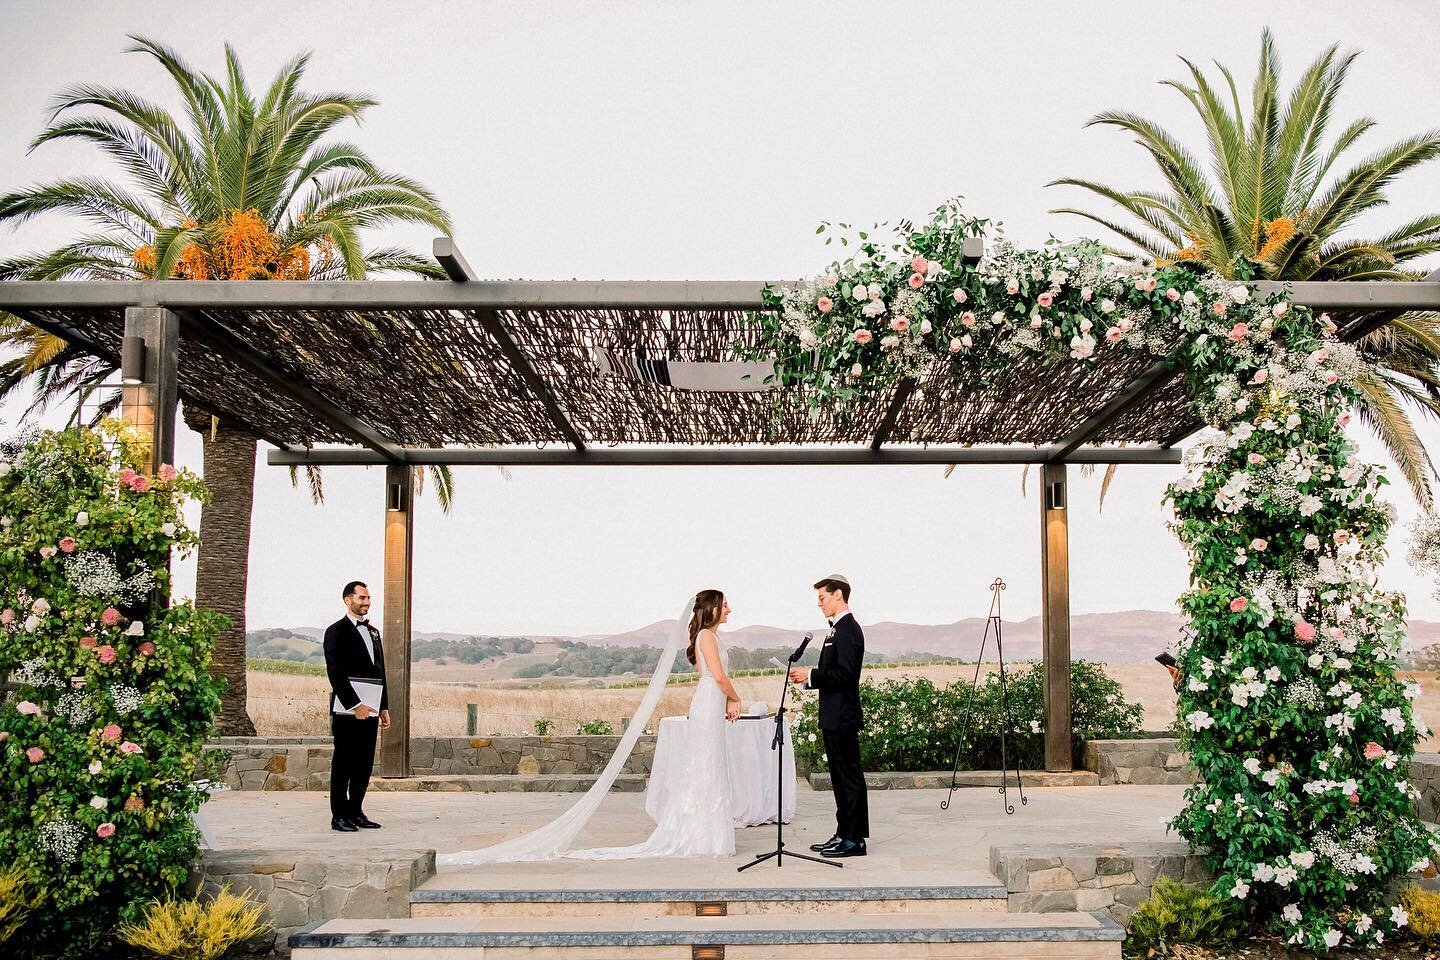 Such a pretty setting under the palm trees for a wine country wedding ceremony 🌴🌴